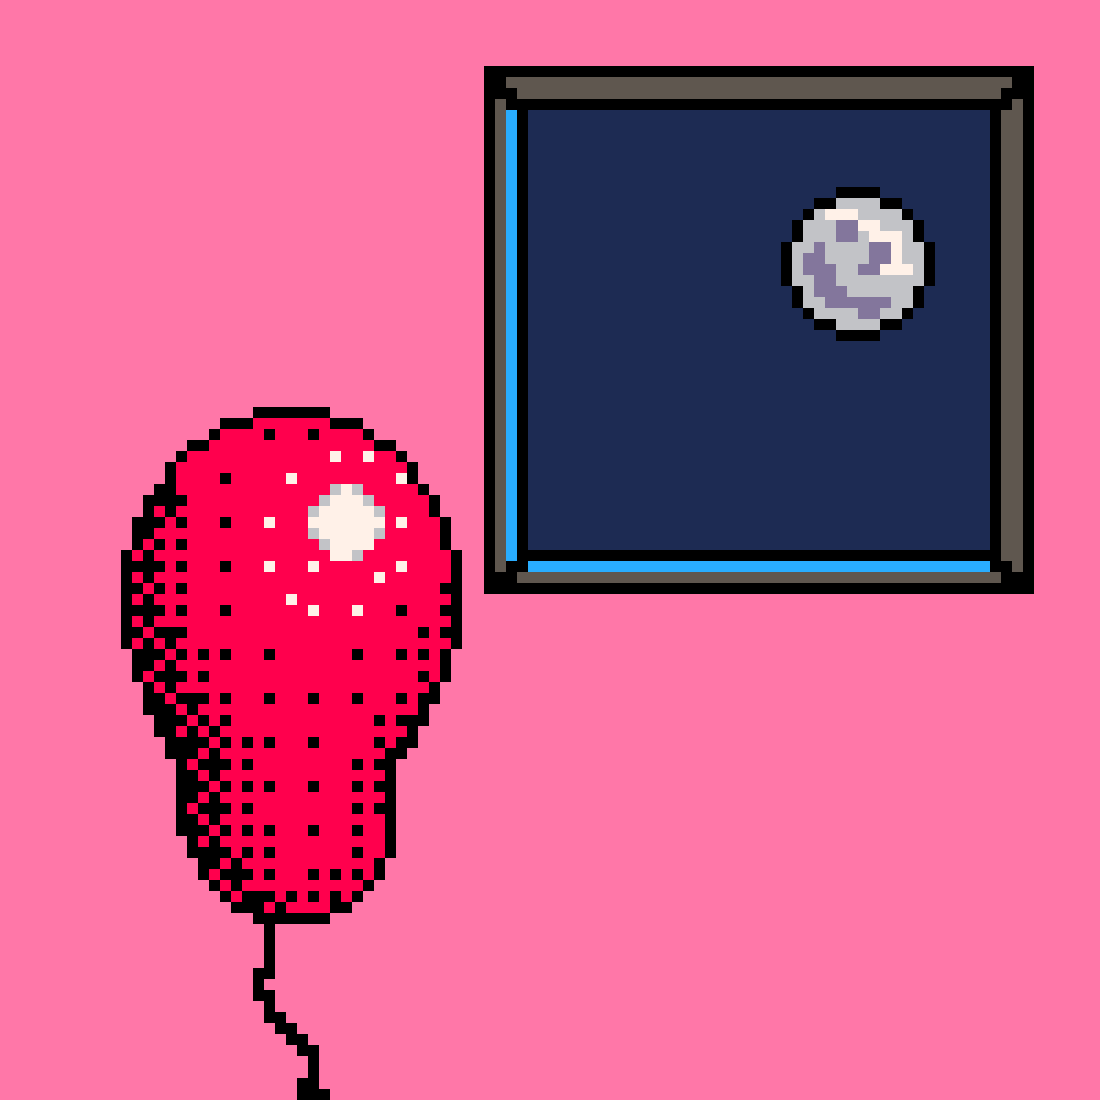 A pixel art portrayal of a pink room with a grey, blue moon framed by a grey window. To the left side of the window is a red balloon. 